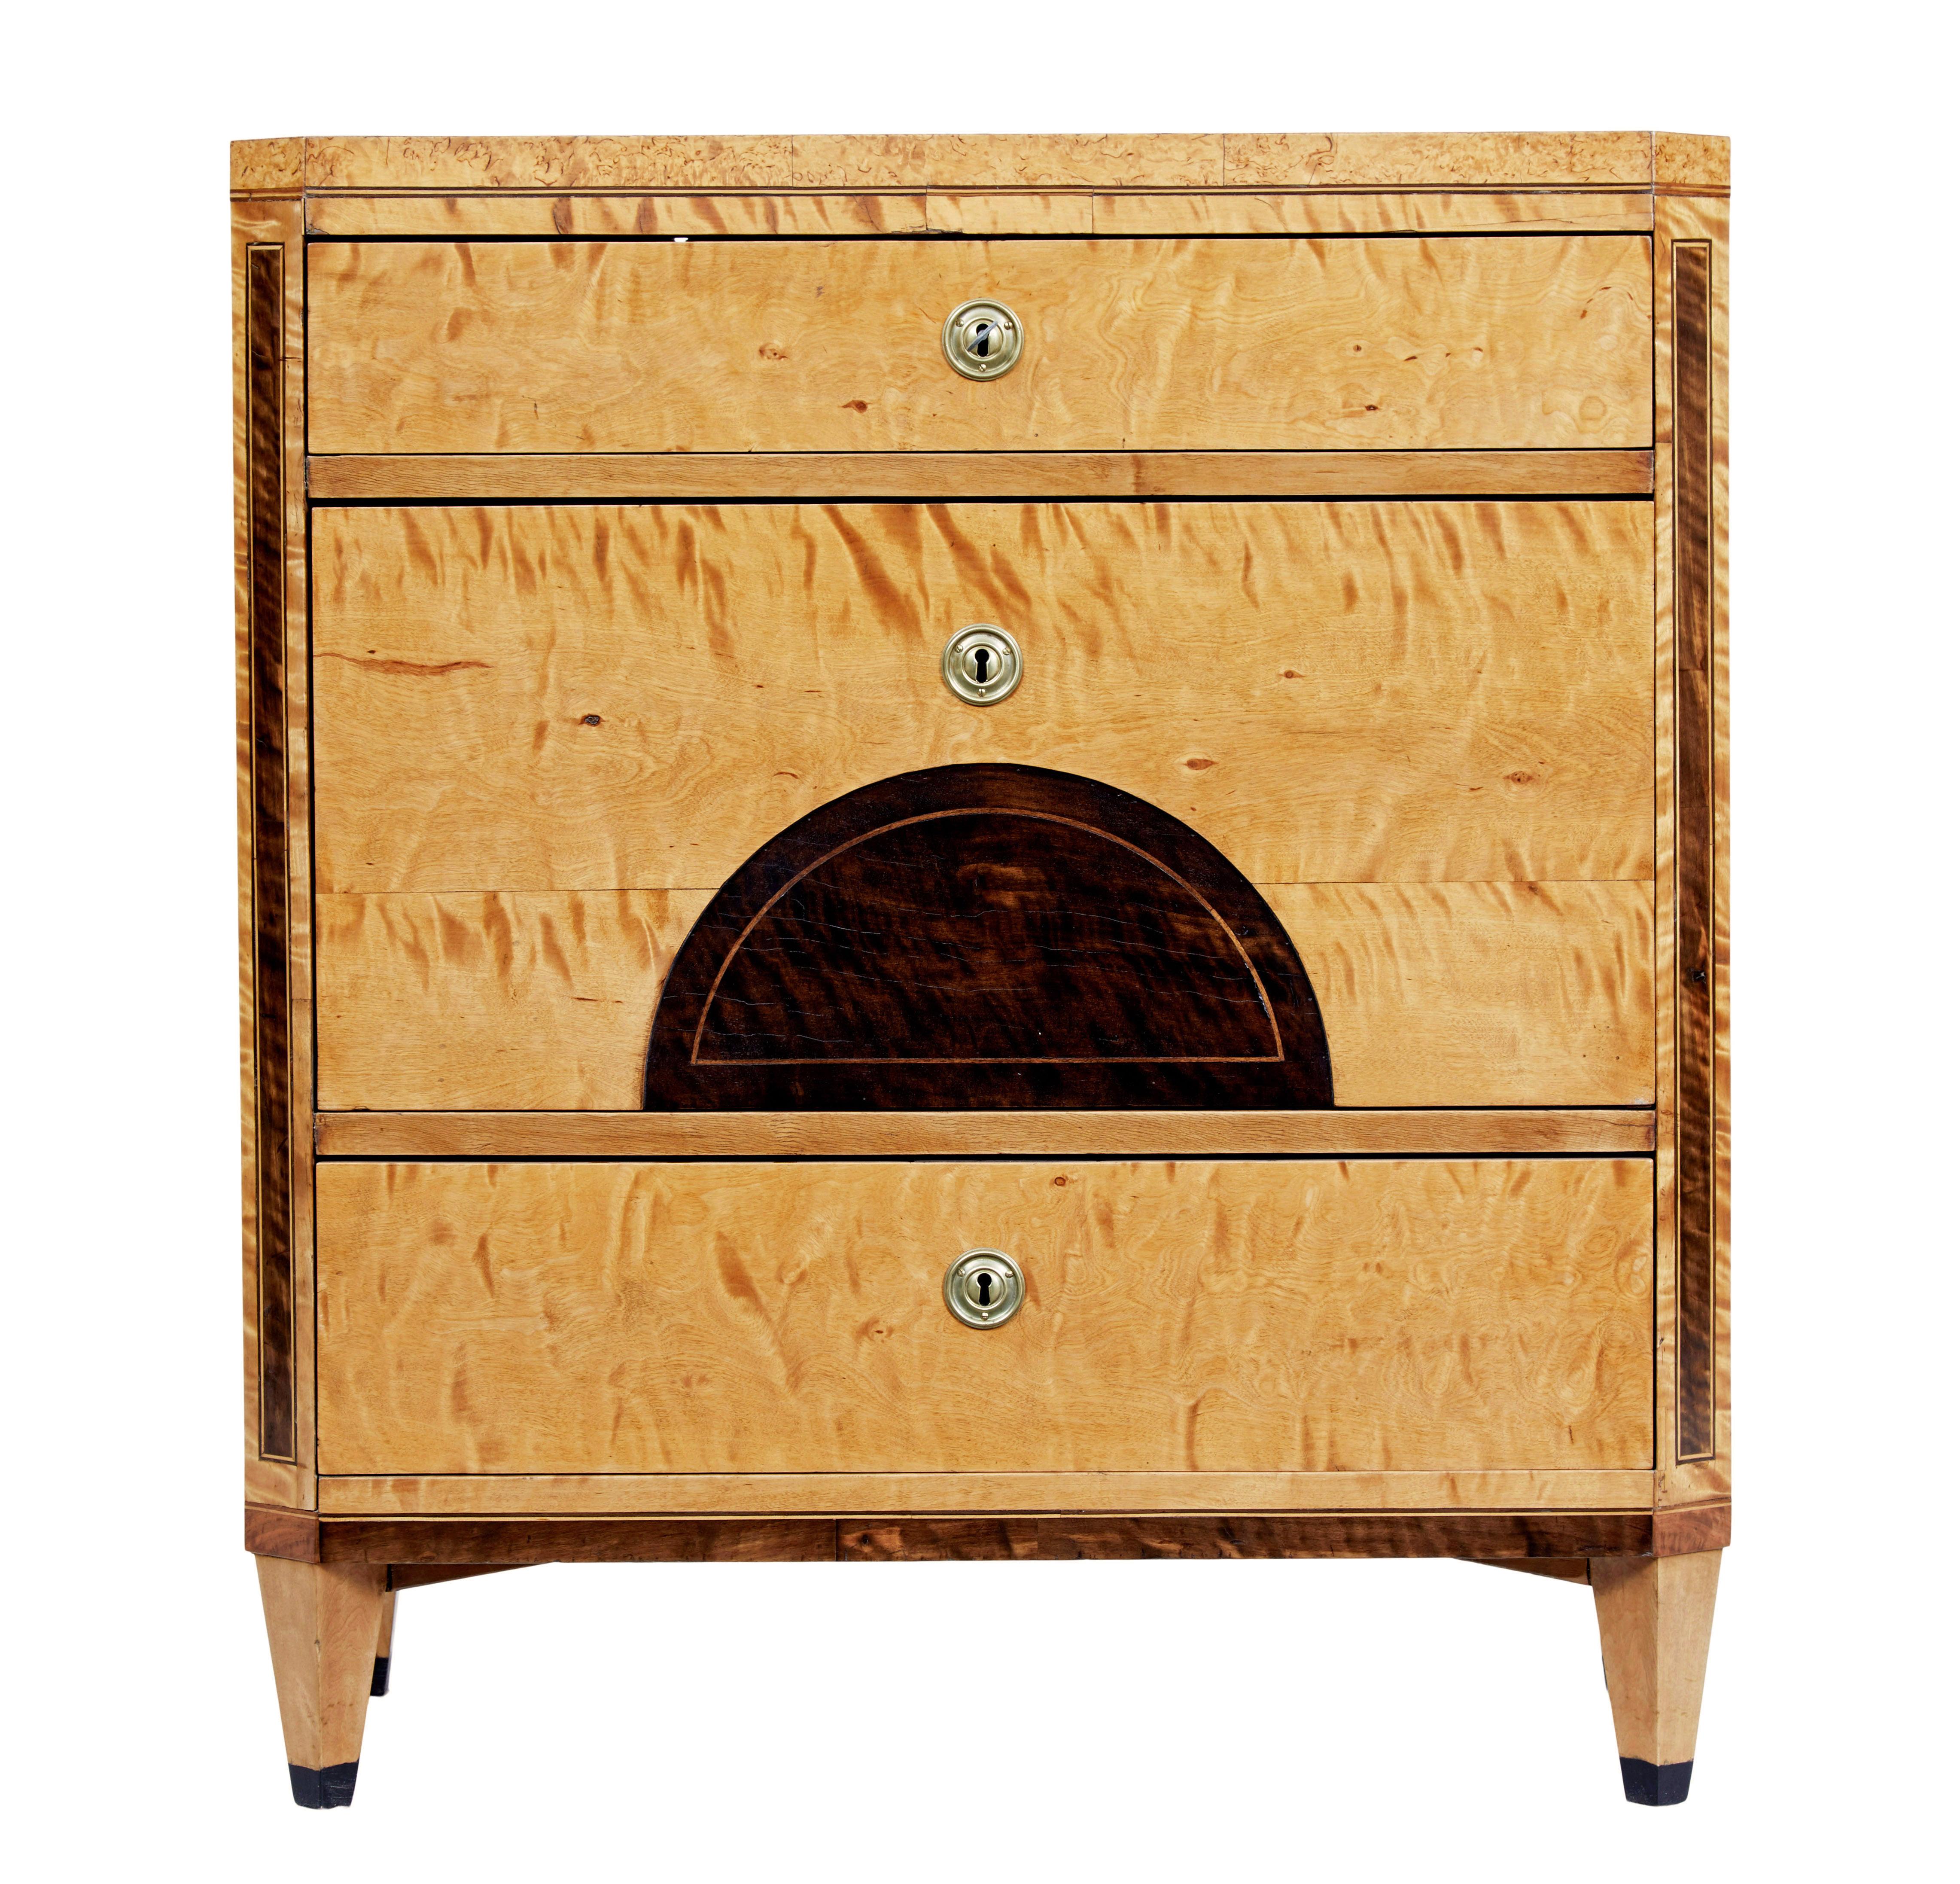 19th Century Swedish 19th century inlaid birch chest of drawers For Sale